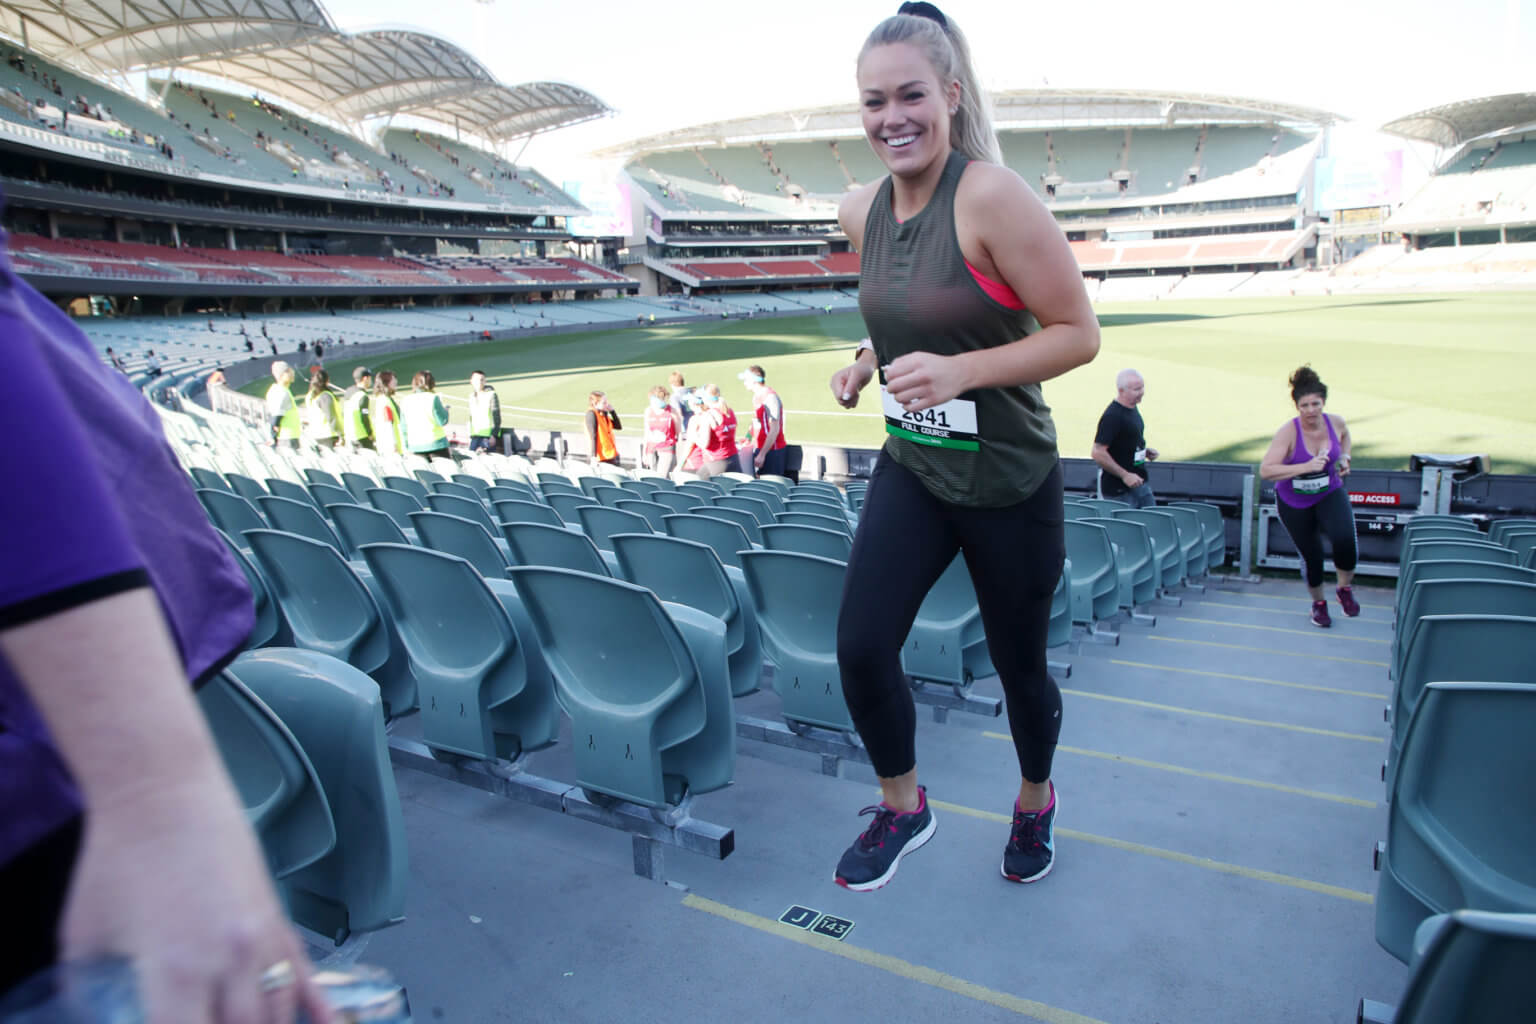 A stadium stomp participant smiling while taking on the event